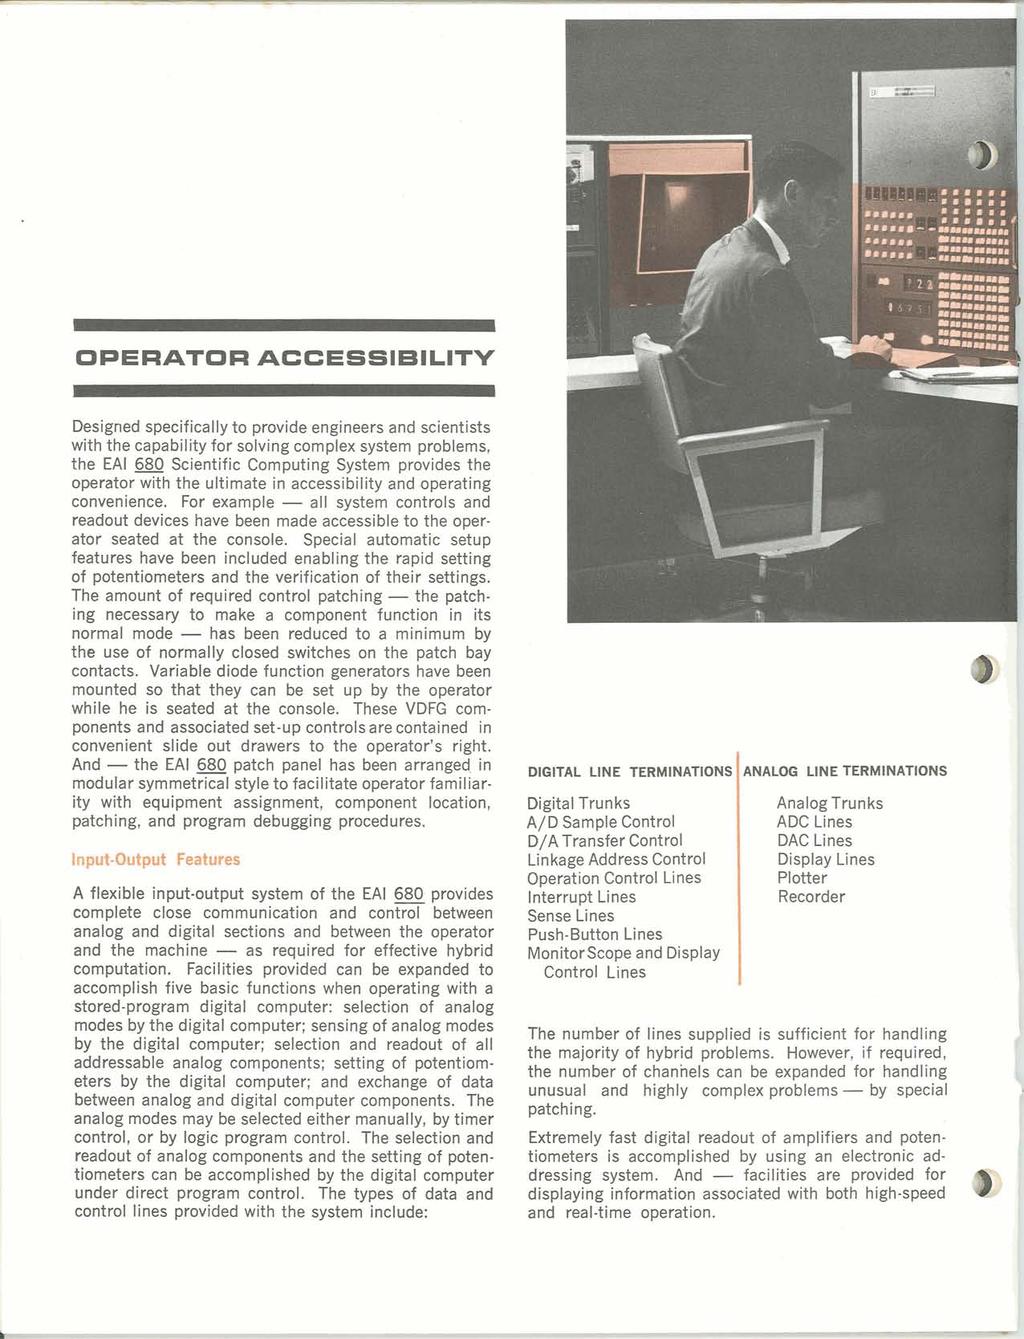 OPERATOR ACCESSIBILITY Designed specifically to provide engineers and scientists with the capability for solving complex system problems, the EAI Scientific Computing System provides the operator